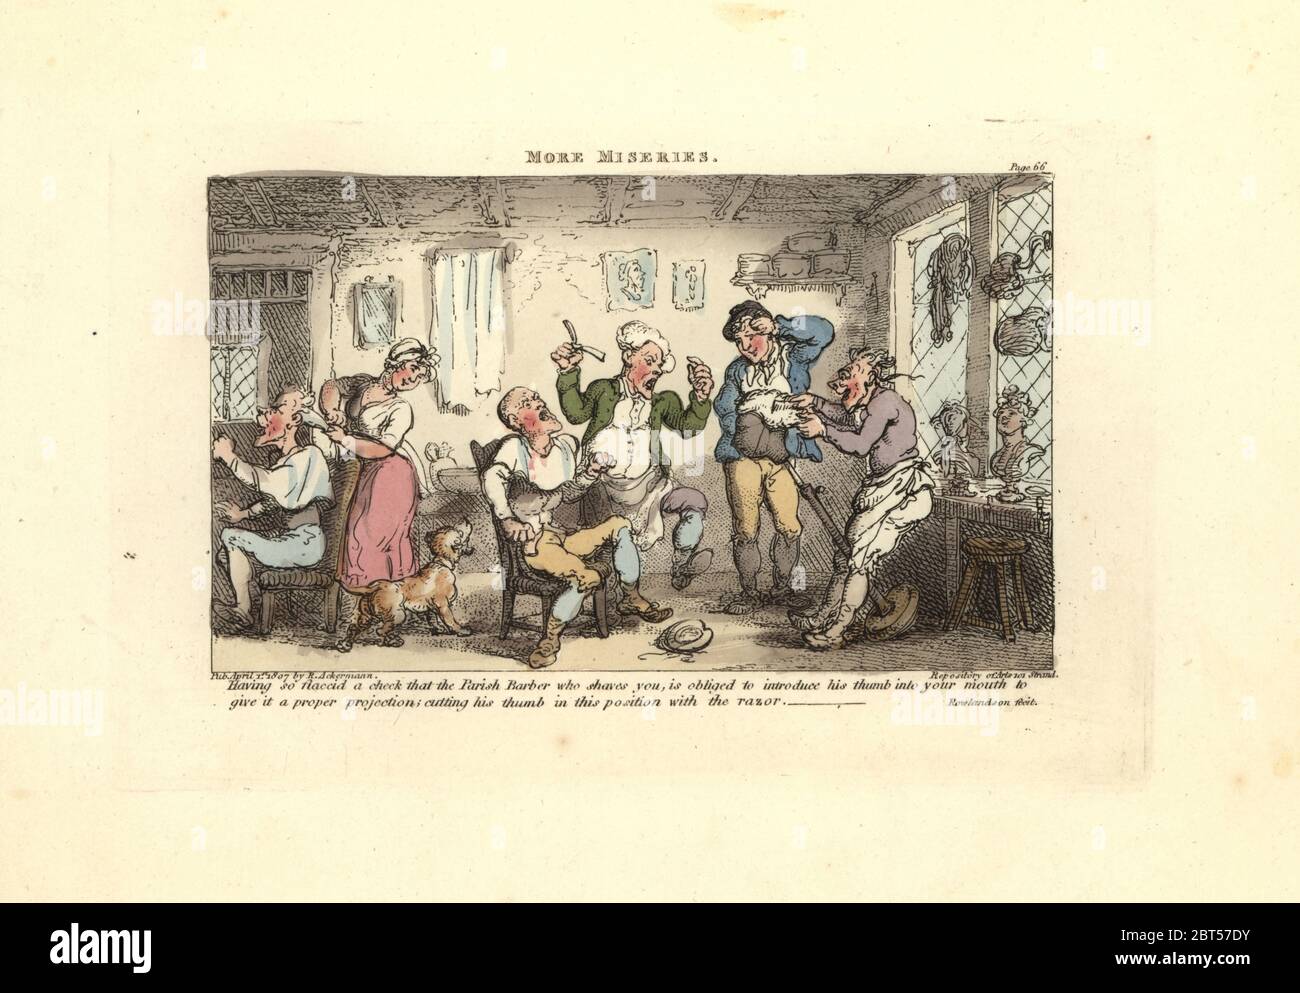 Barber cutting his thumb with a razor trying to shave a customer with soft cheeks. More Miseries. Handcoloured copperplate engraving designed and etched by Thomas Rowlandson to accompany Reverend James Beresfords Miseries of Human Life, Ackermann, 1808. Stock Photo